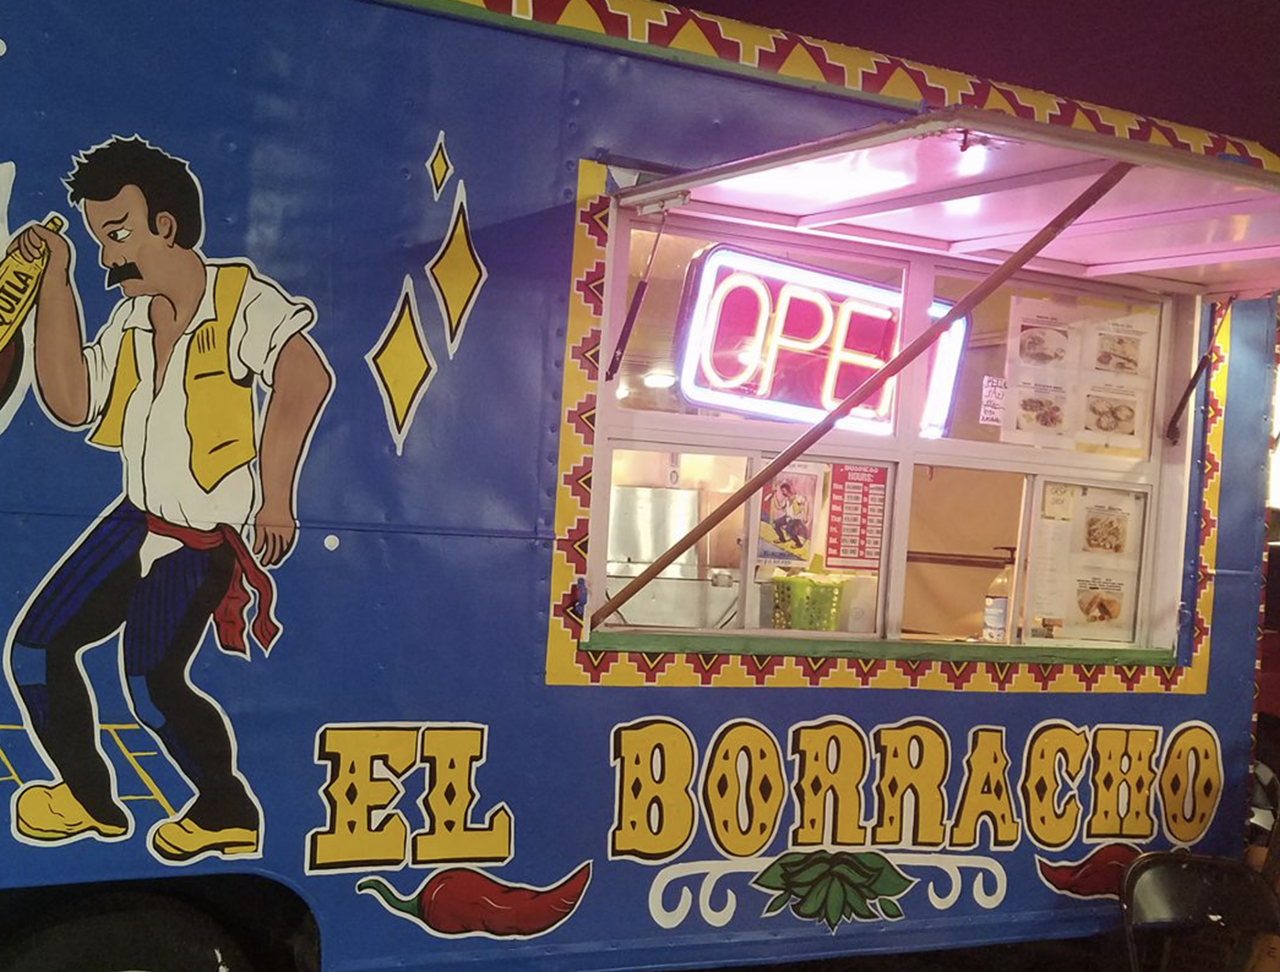 Tacos el Borracho
2602 W Kennedy Blvd., Tampa
You can fuel up times two at this taco truck neighboring a Marathon gas station. Reviews praise the food truck's friendly staff and impeccable birria and barbacoa tacos. 
Photo via Tacos el Borracho/Facebook